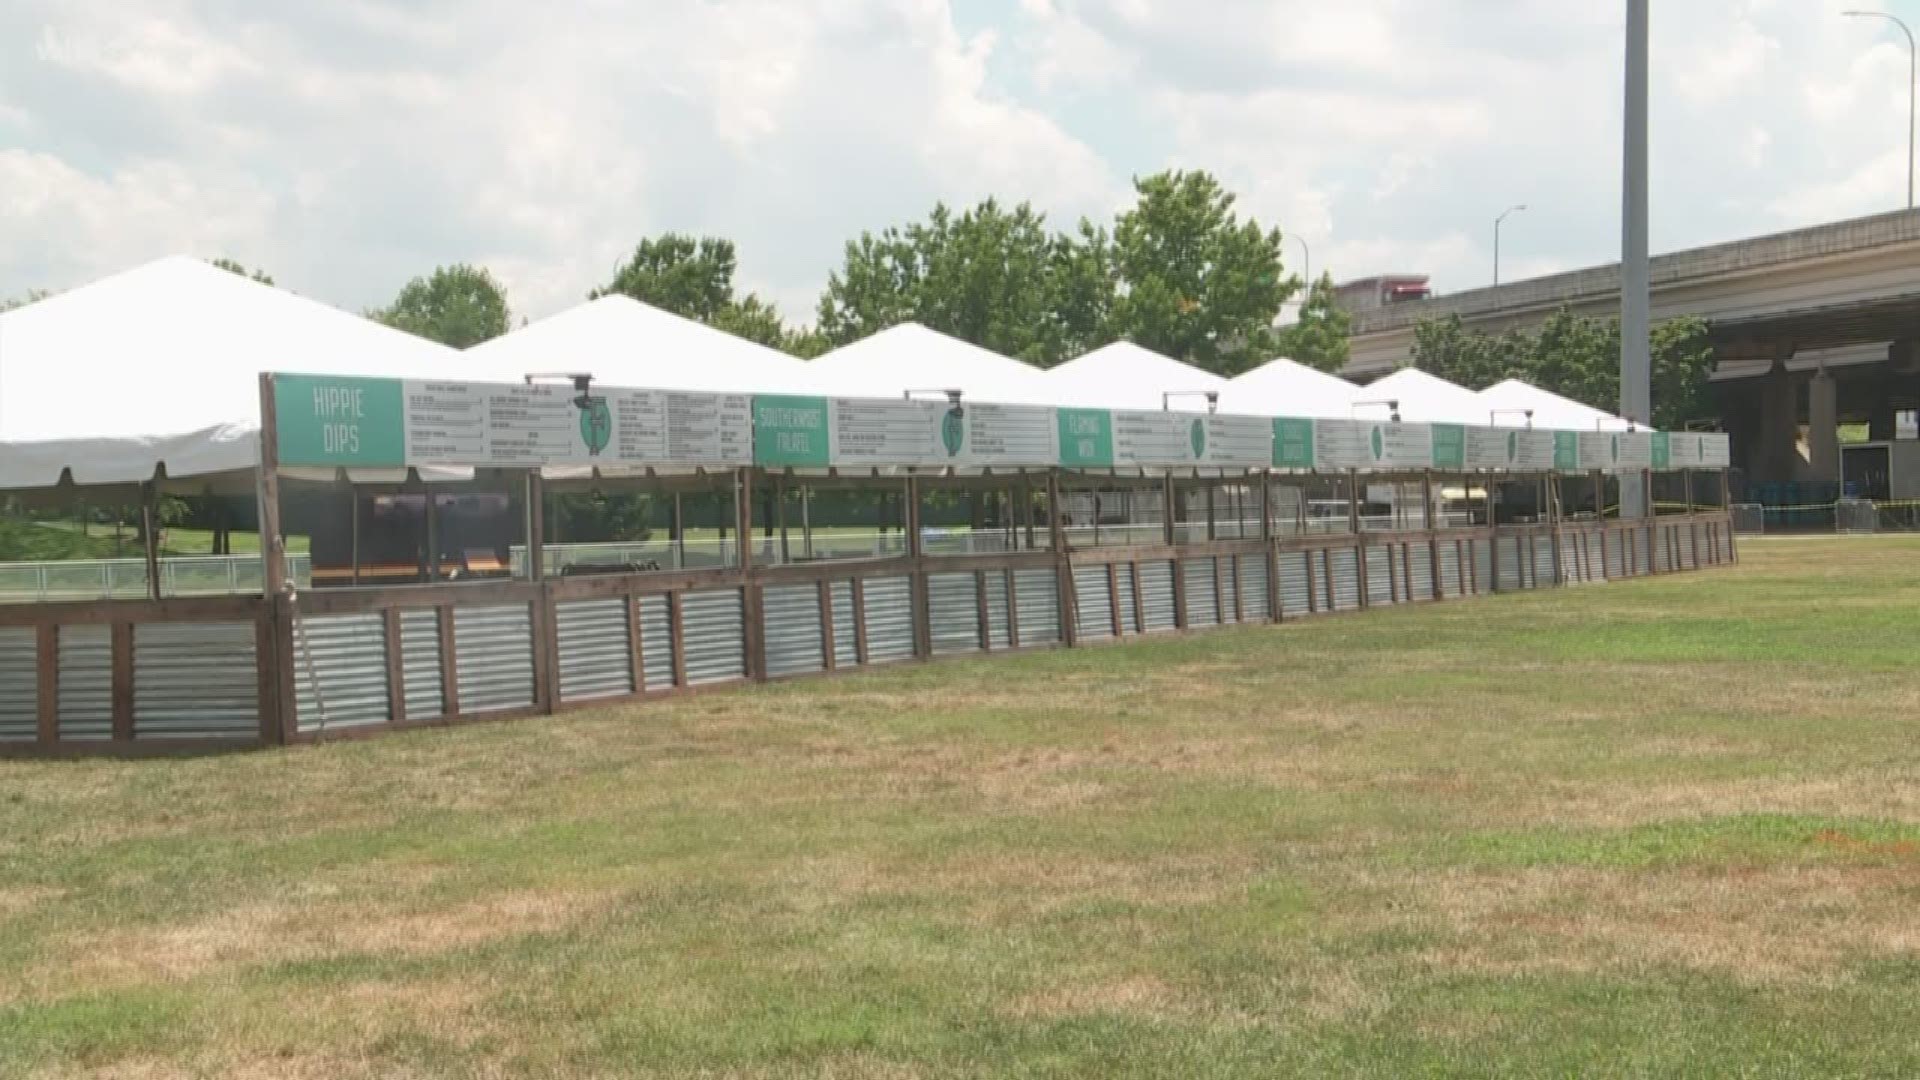 Waterfront Park is slowly transforming into a mix of music, bourbon and food for Forecastle.